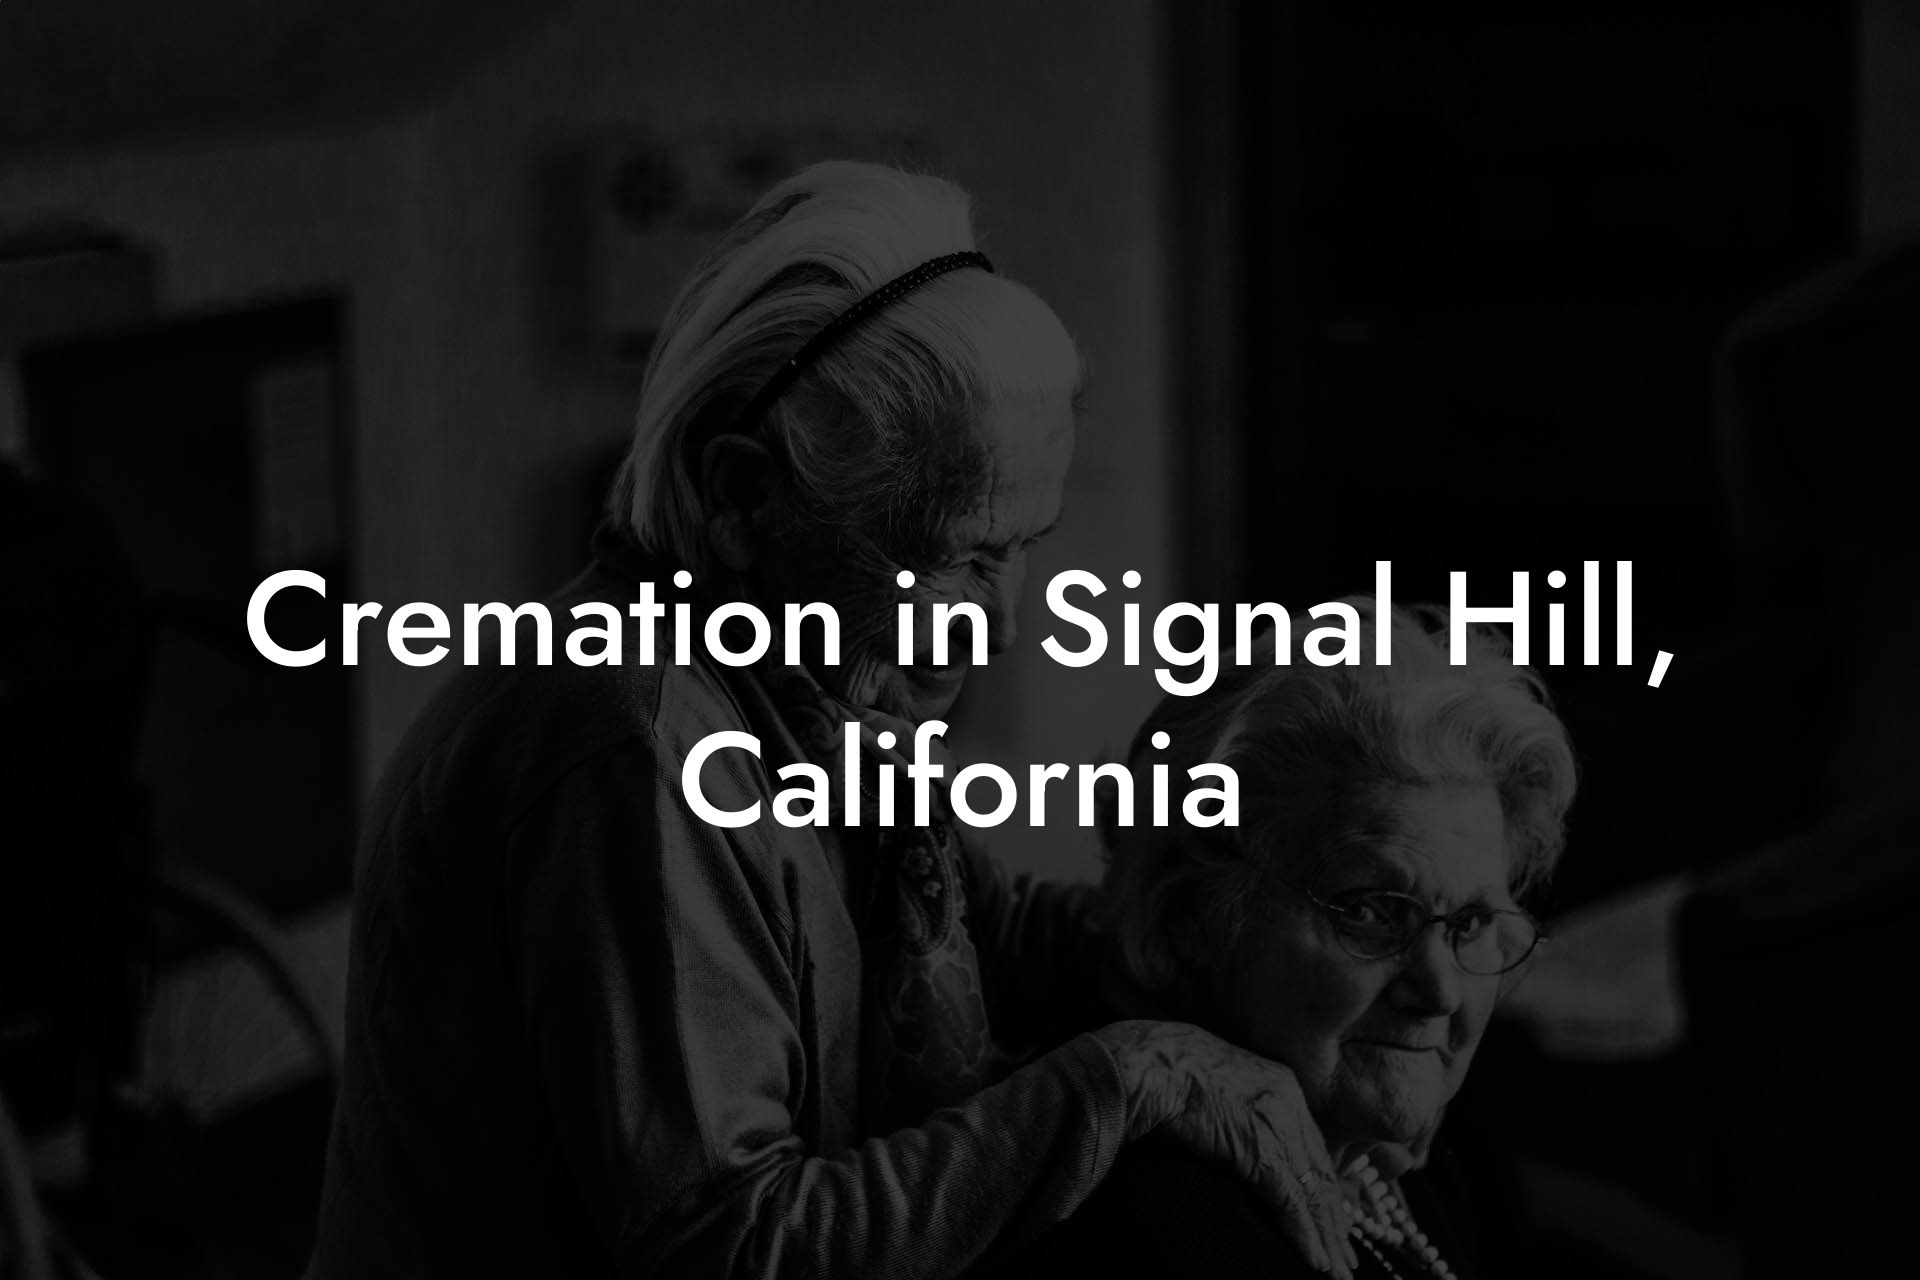 Cremation in Signal Hill, California